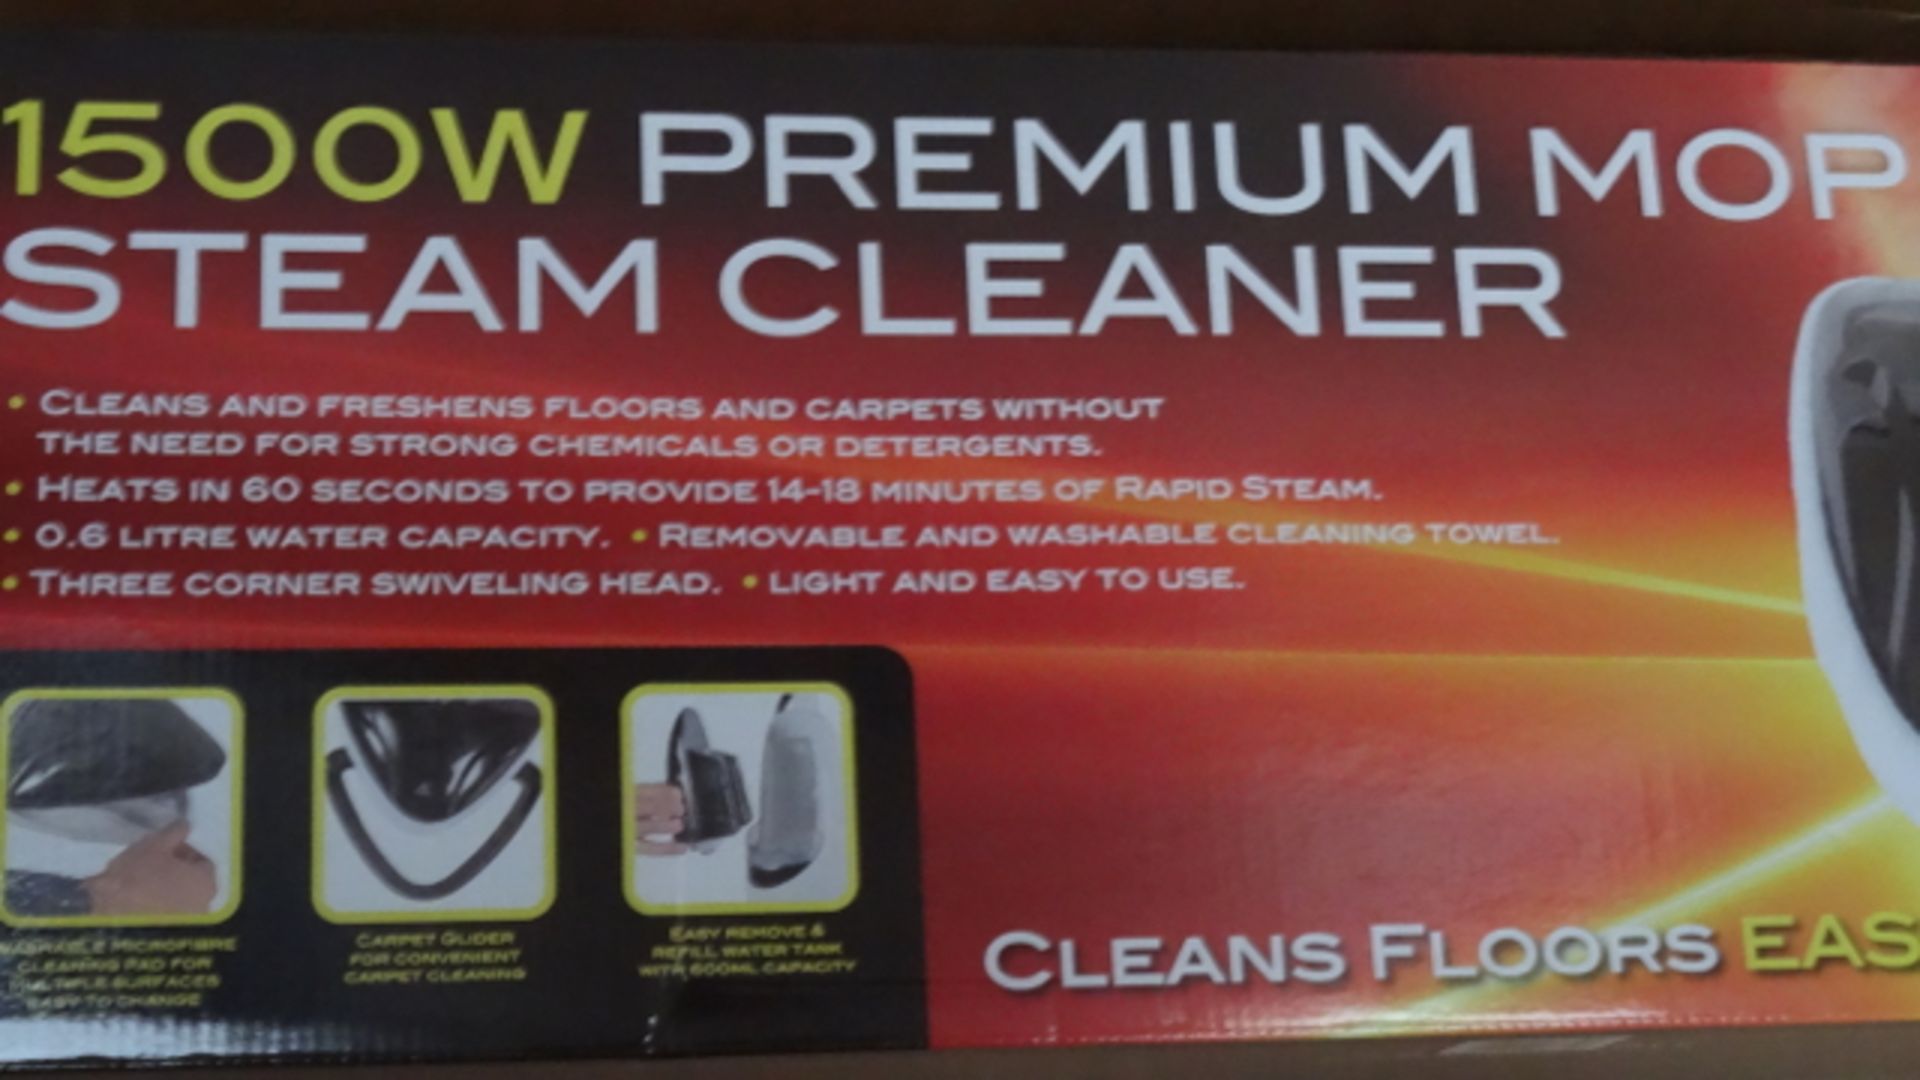 2 x Brand New Quest 1500W Premium Mop Steam Cleaners. Cleans floors, carpets, work surfaces and - Image 3 of 3